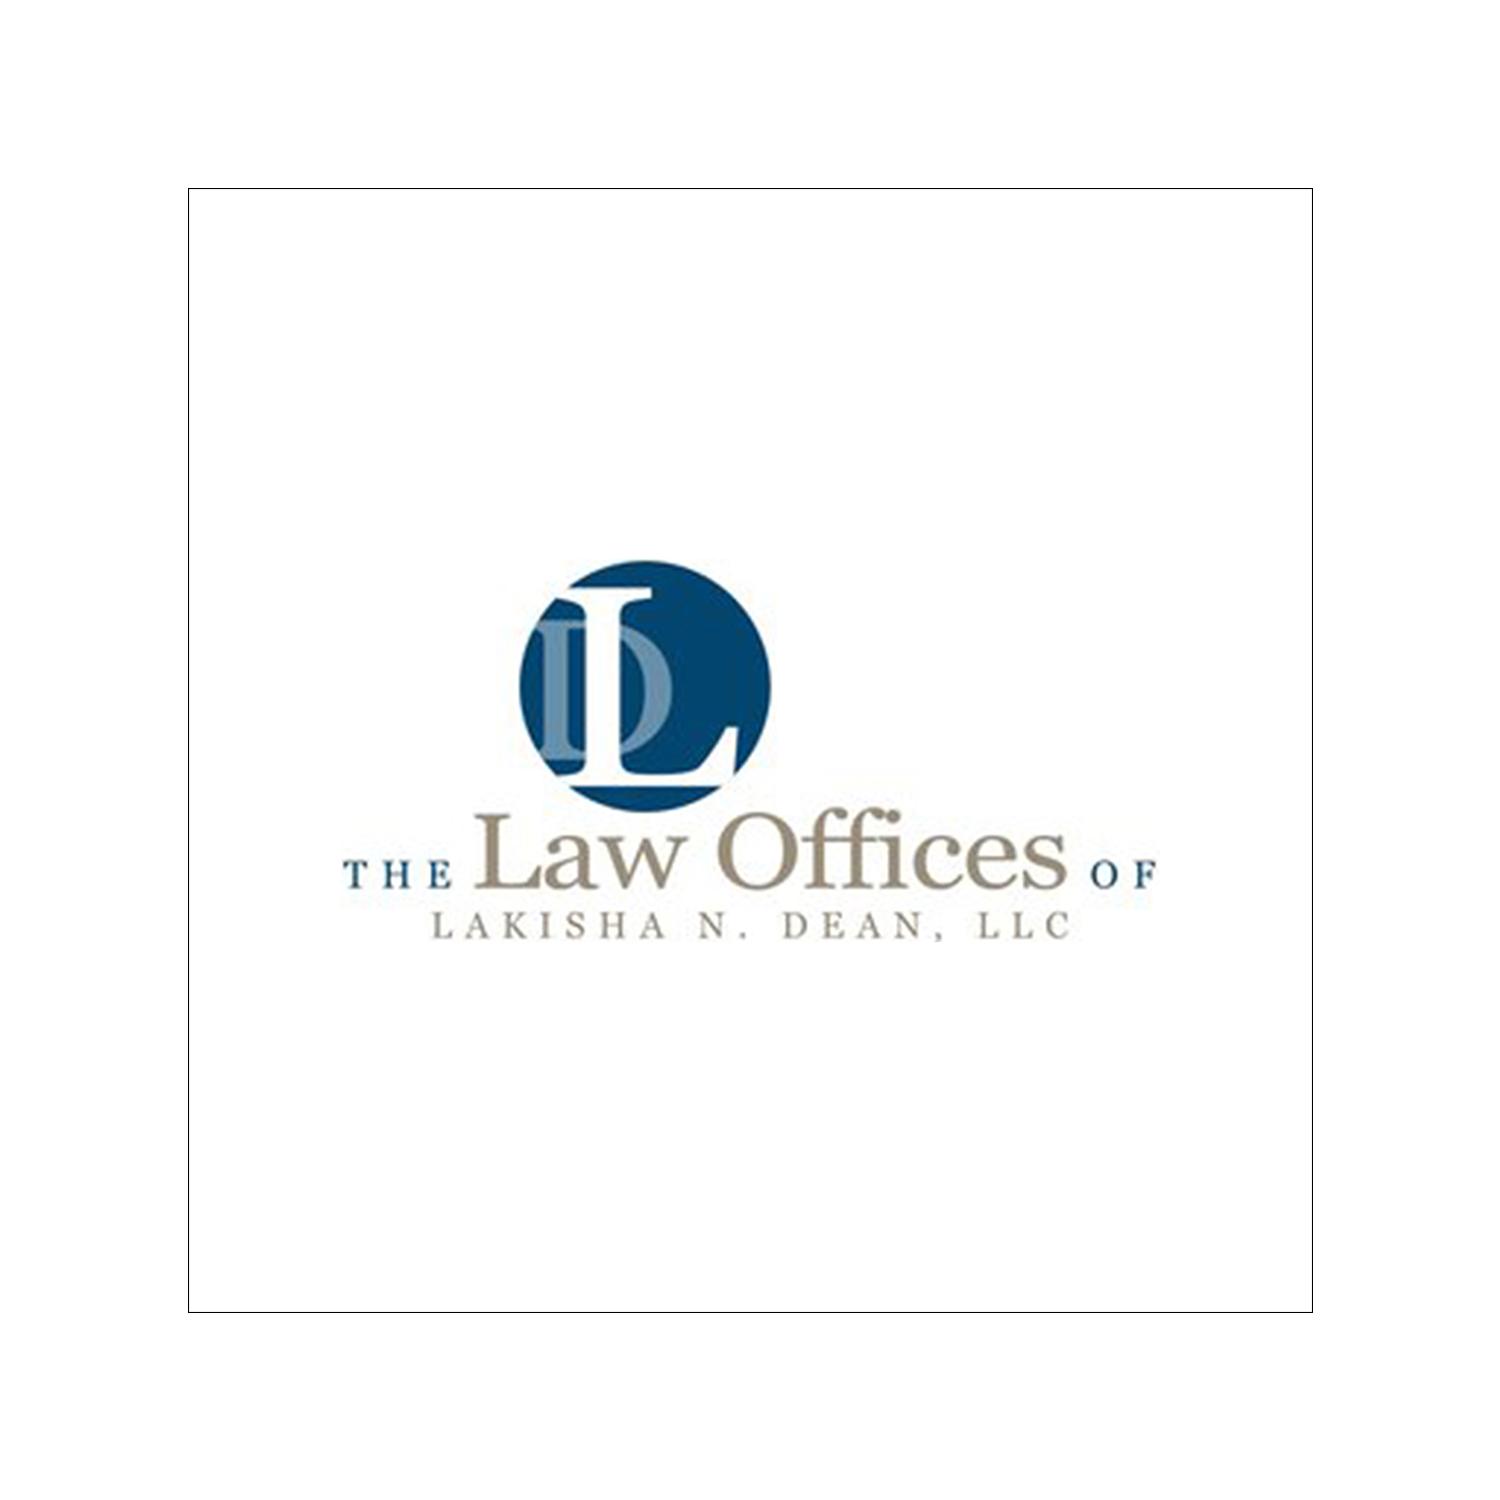 The Law Offices of Lakisha N. Dean